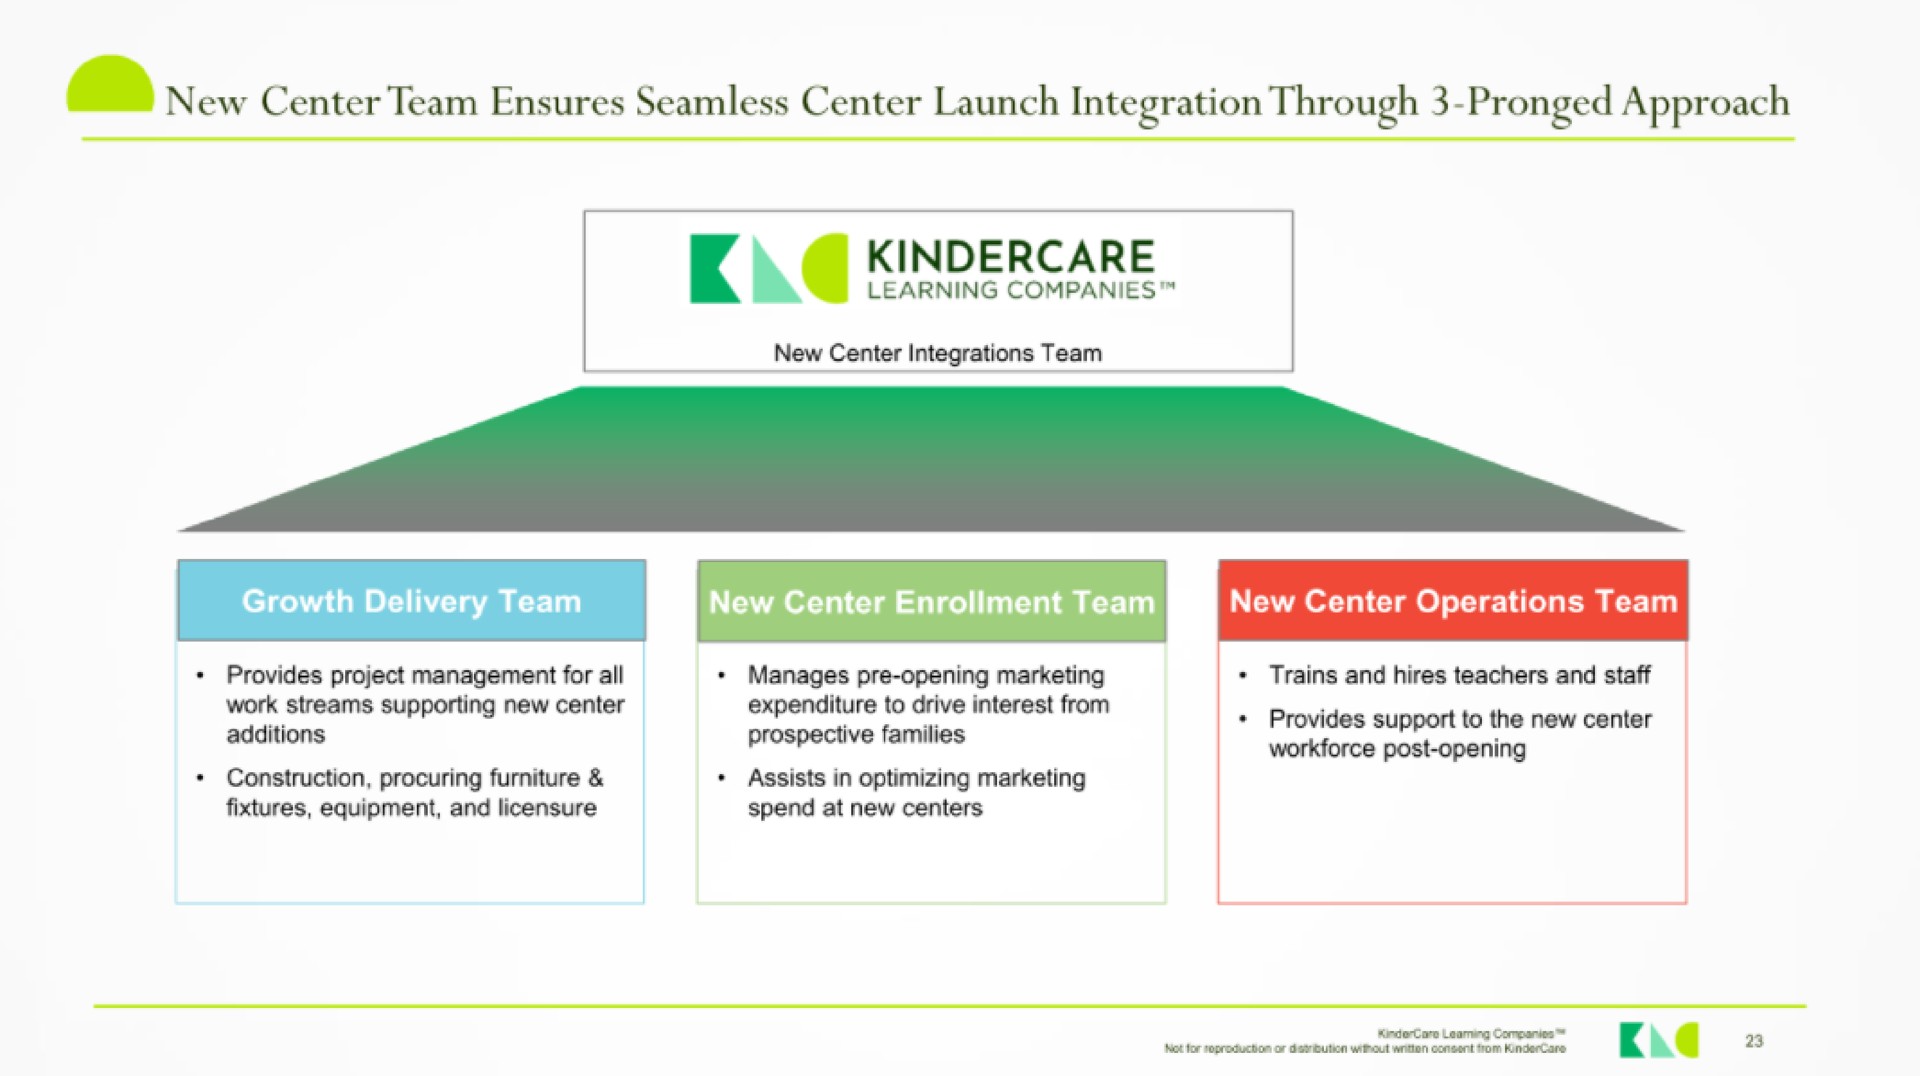 new center team ensures seamless center launch integration through pronged approach additions prospective families poet opening | KinderCare